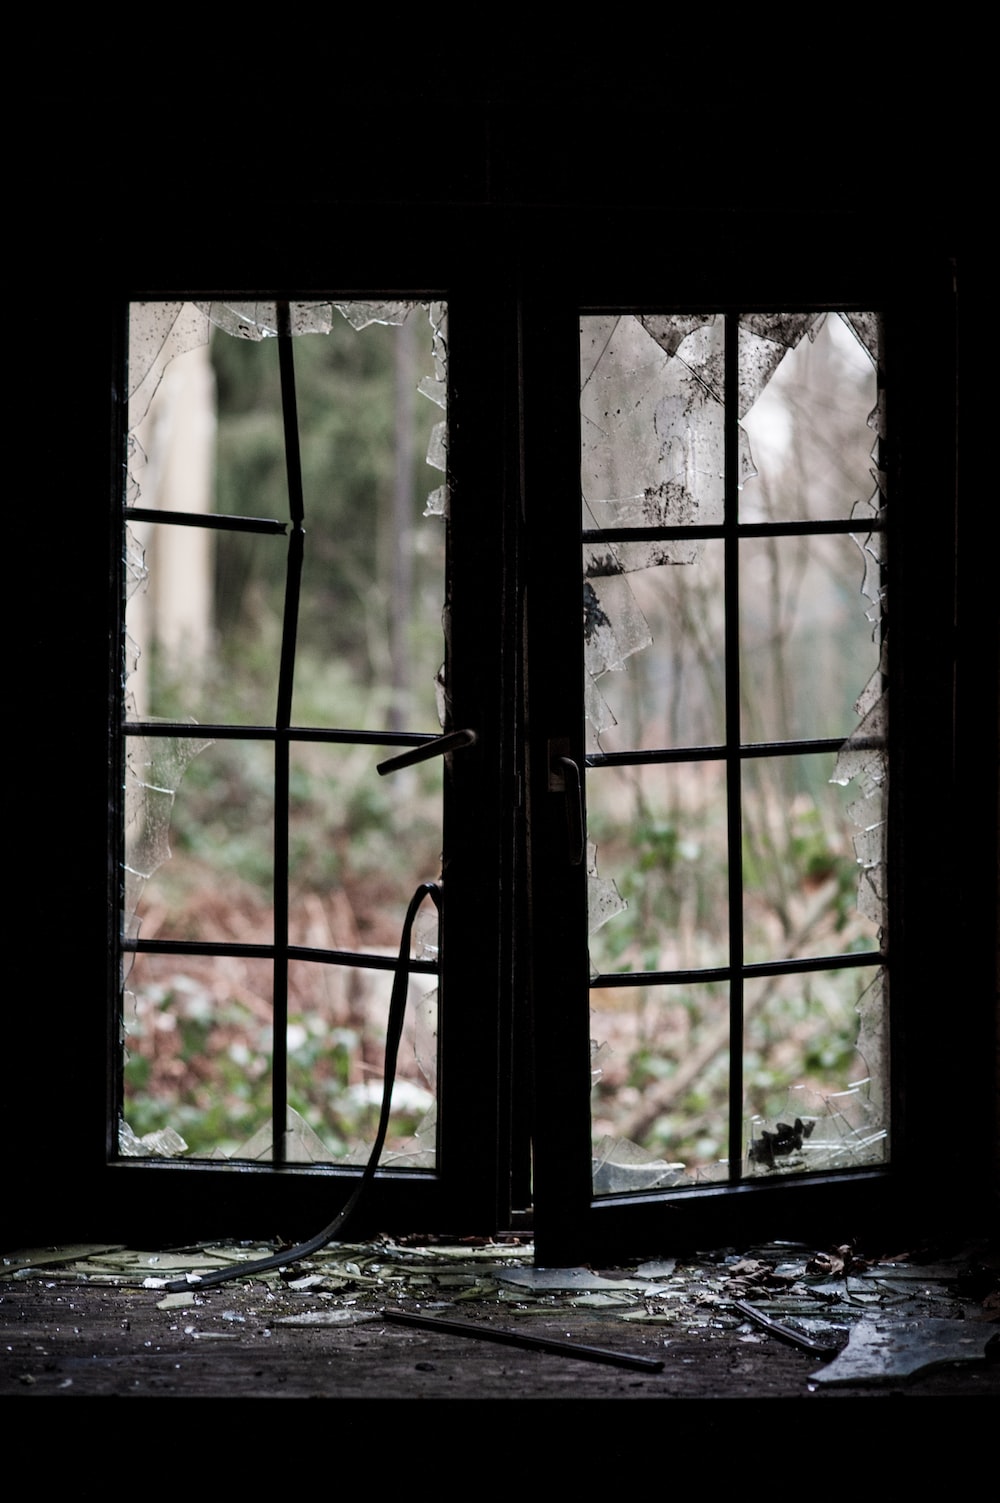 Broken window pictures download free images on